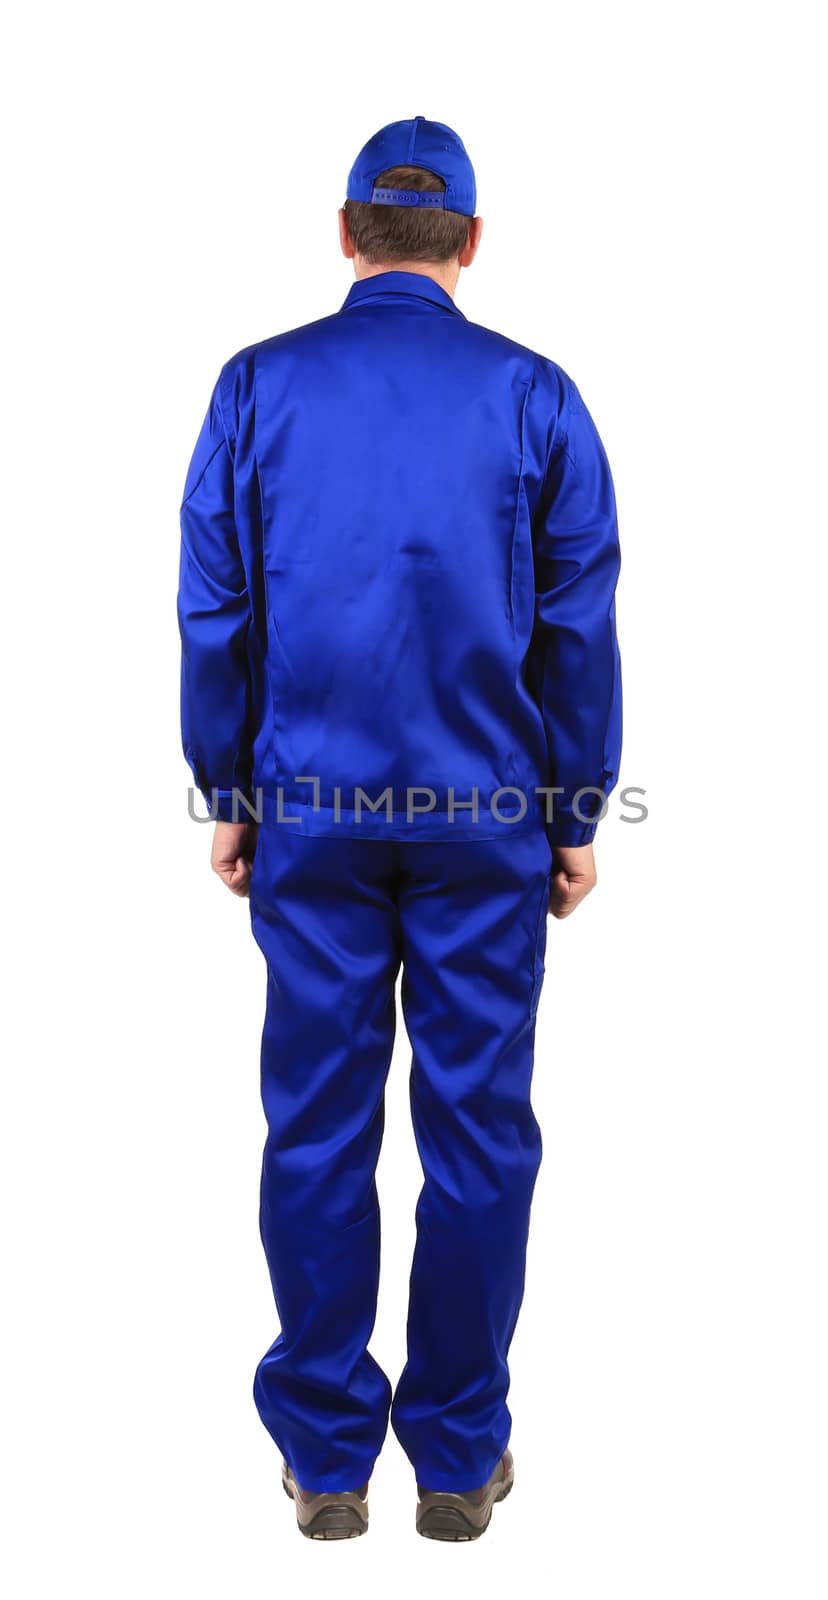 Worker in blue workwear. Back view. Isolated on a white background.